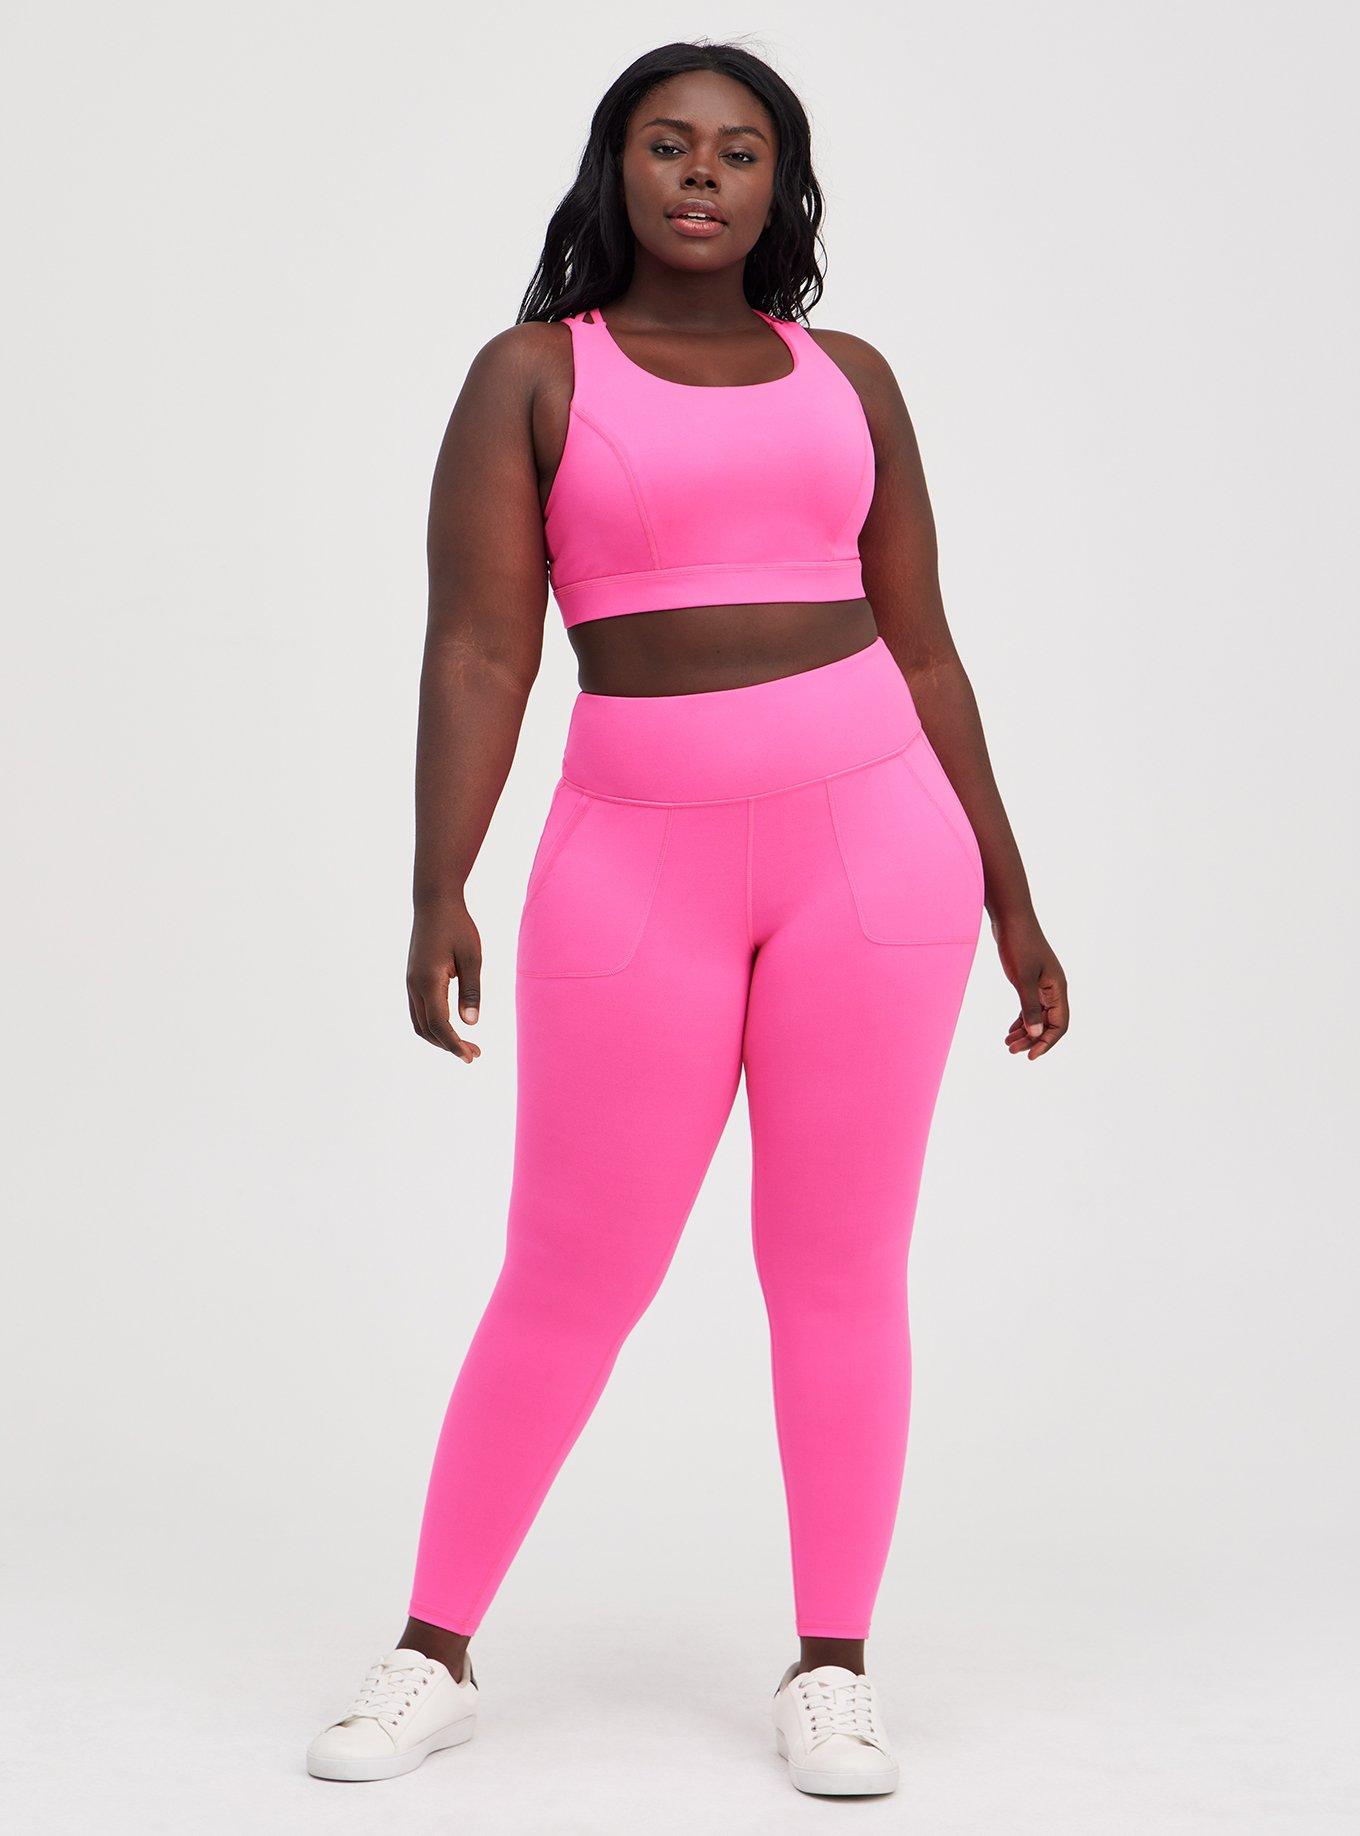 Plus Size - Super Soft Performance Jersey Full Length Active